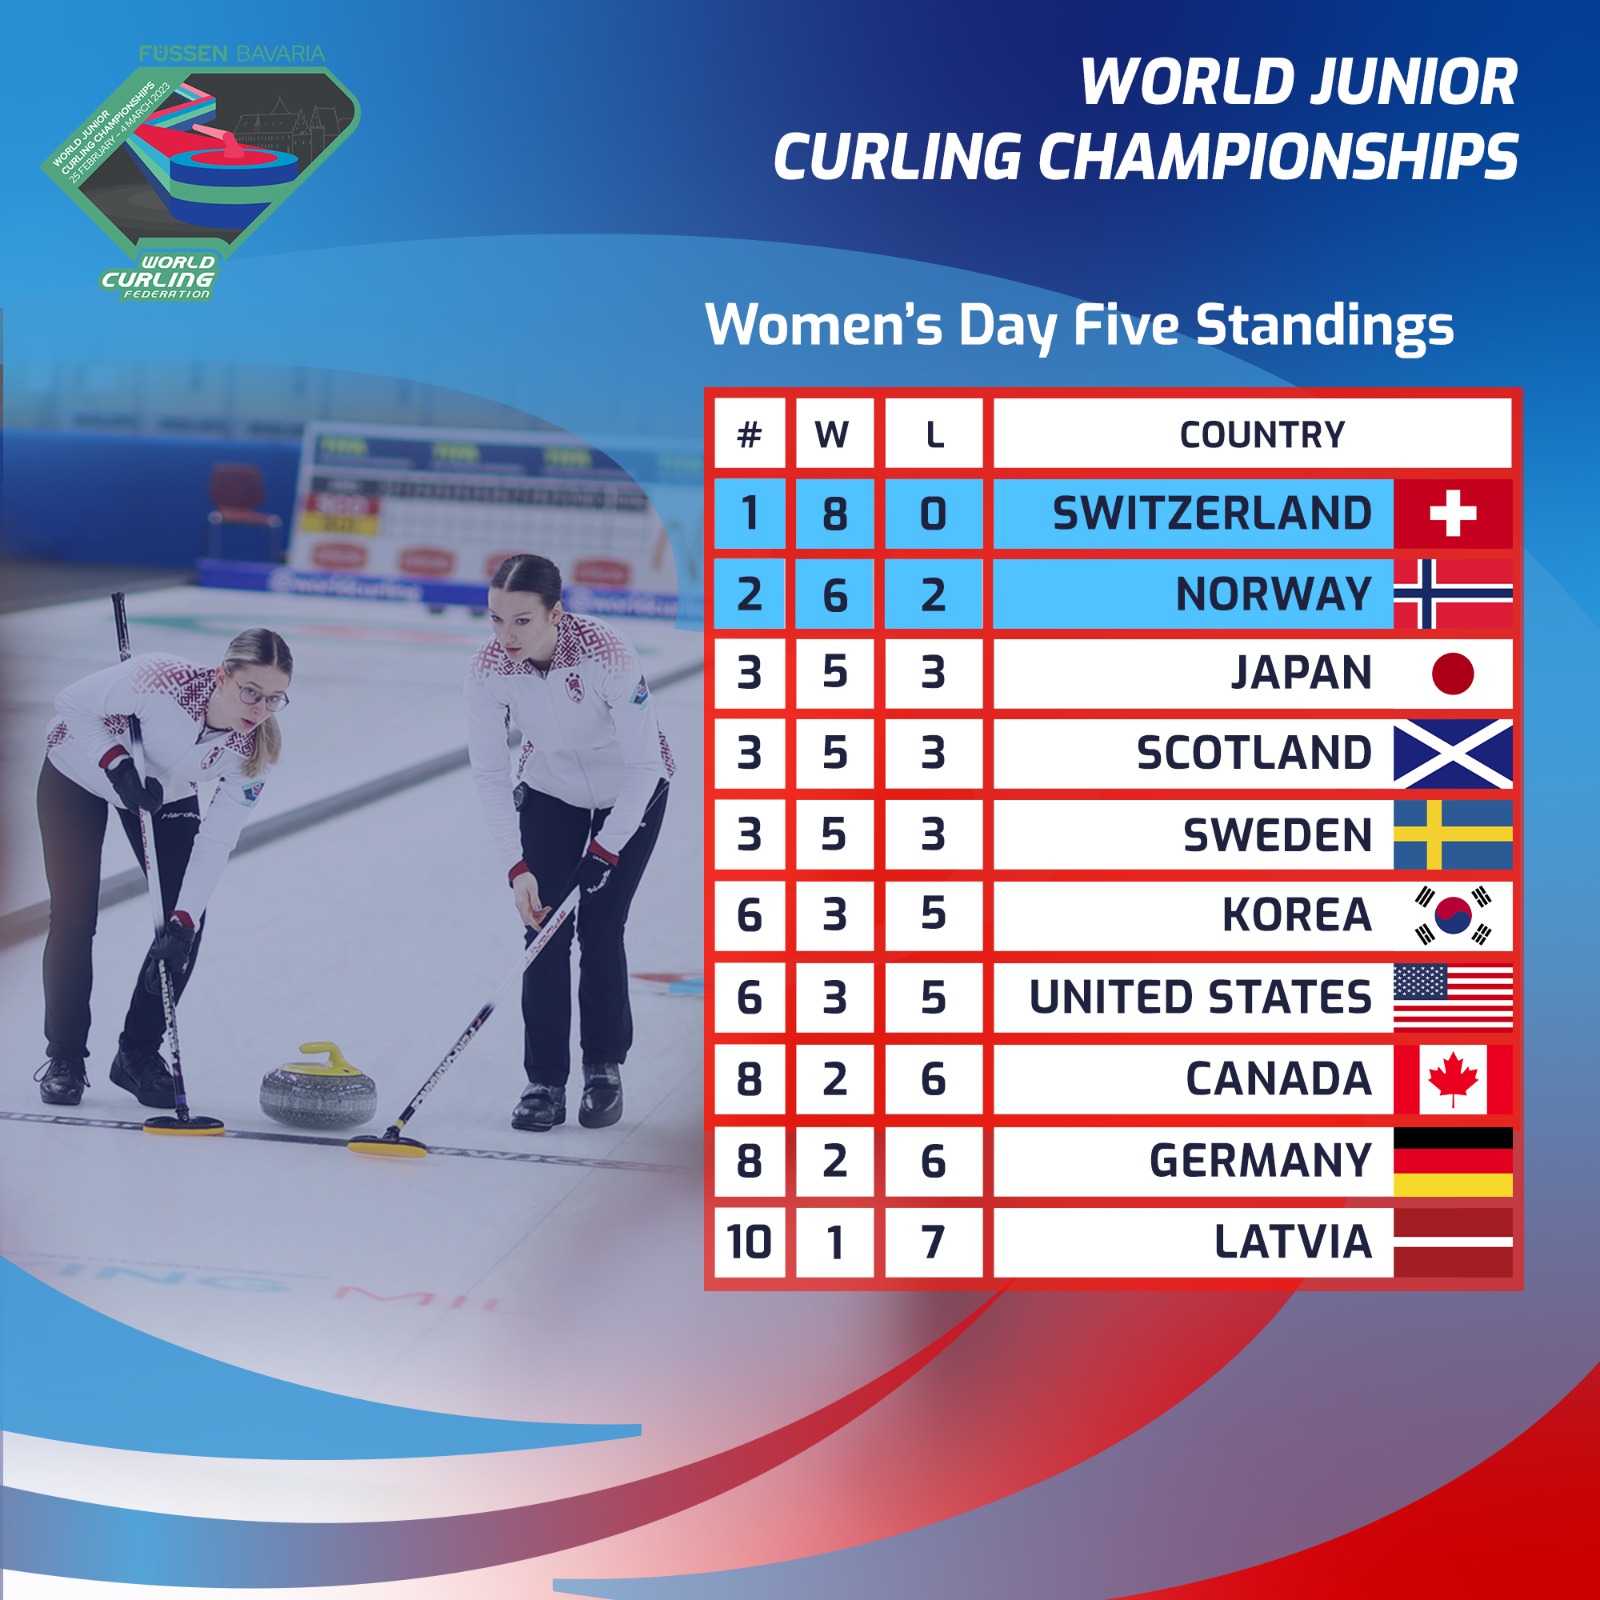 World Curling on Twitter "And here it is, the women's standings after